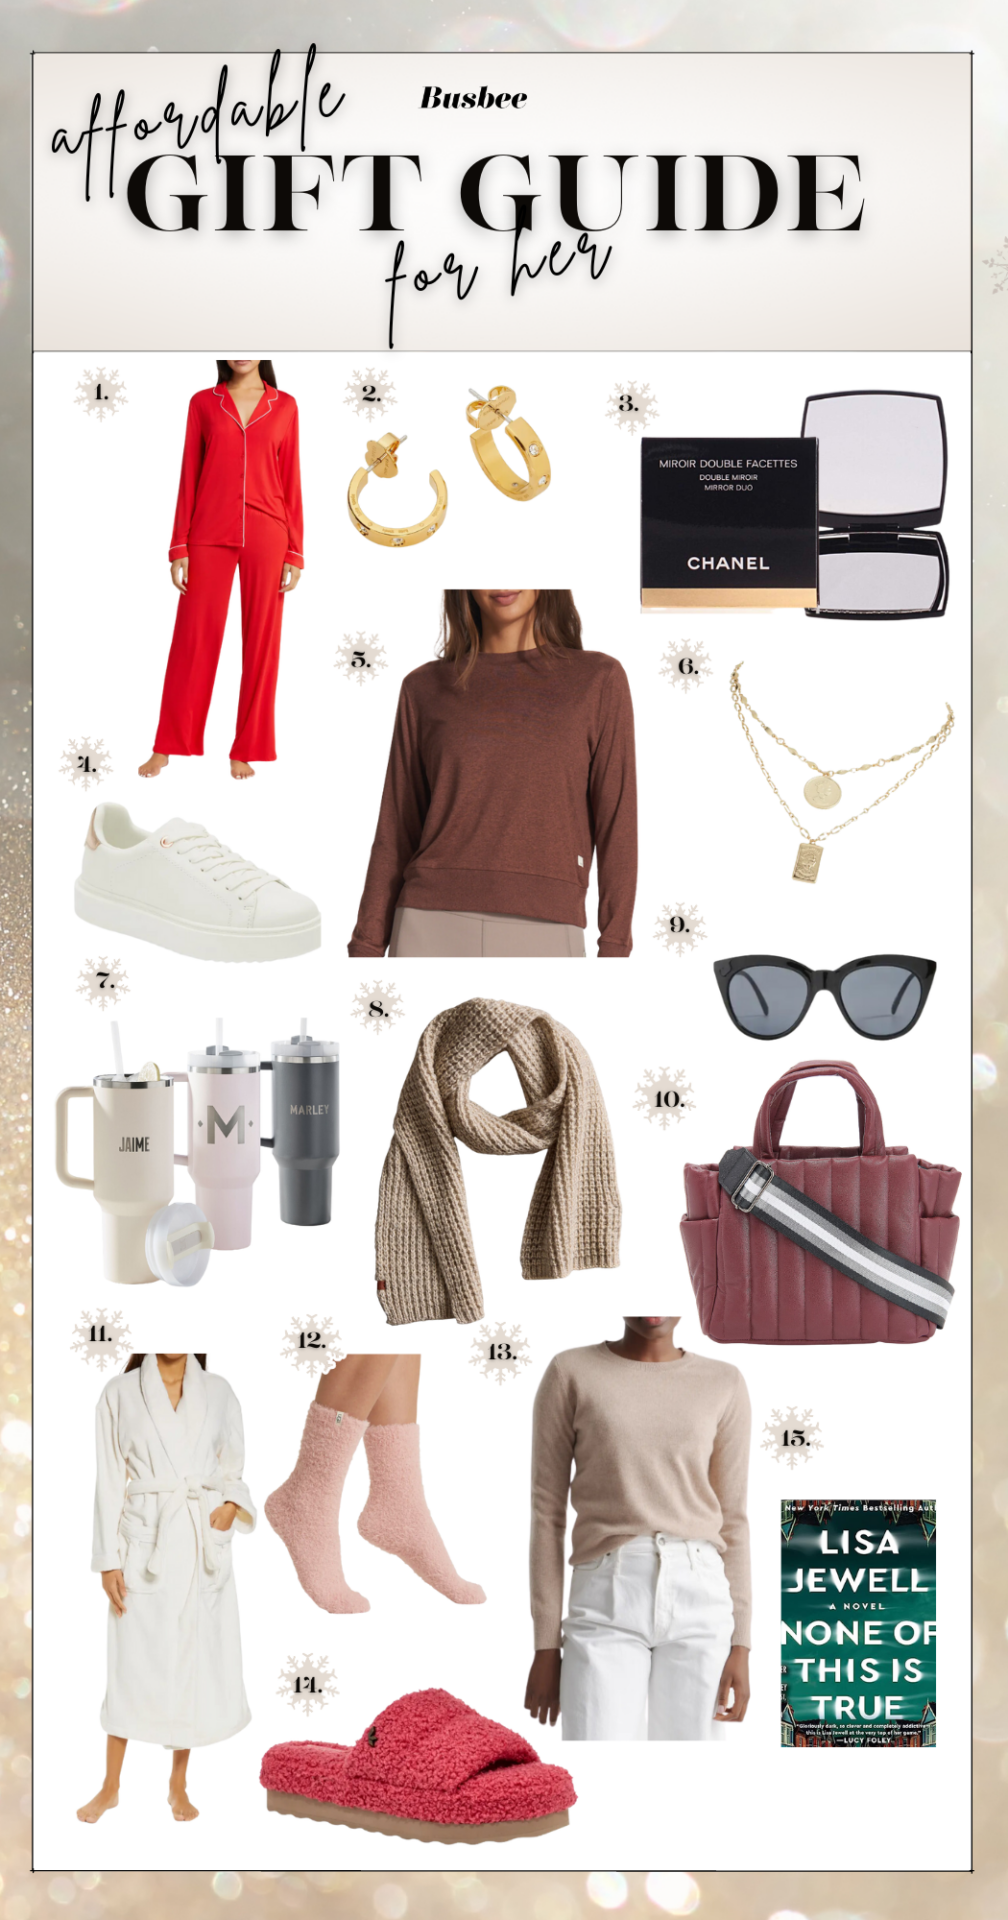 15 Generation Z Gift Ideas That Will Make You the Cool Mom